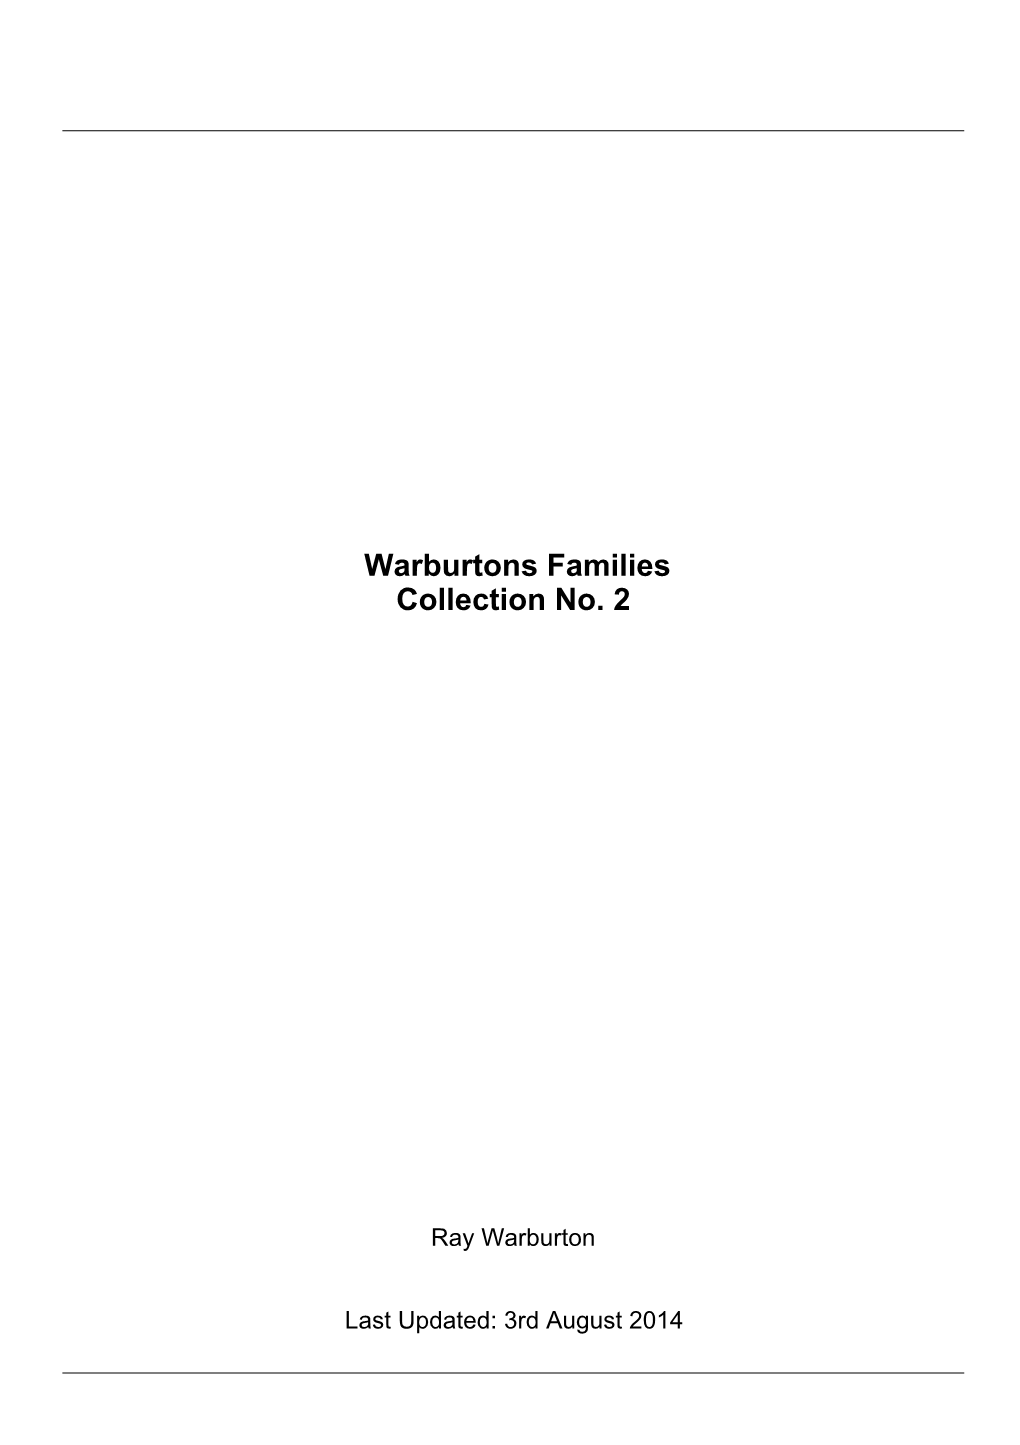 Warburtons Families Collection No. 2